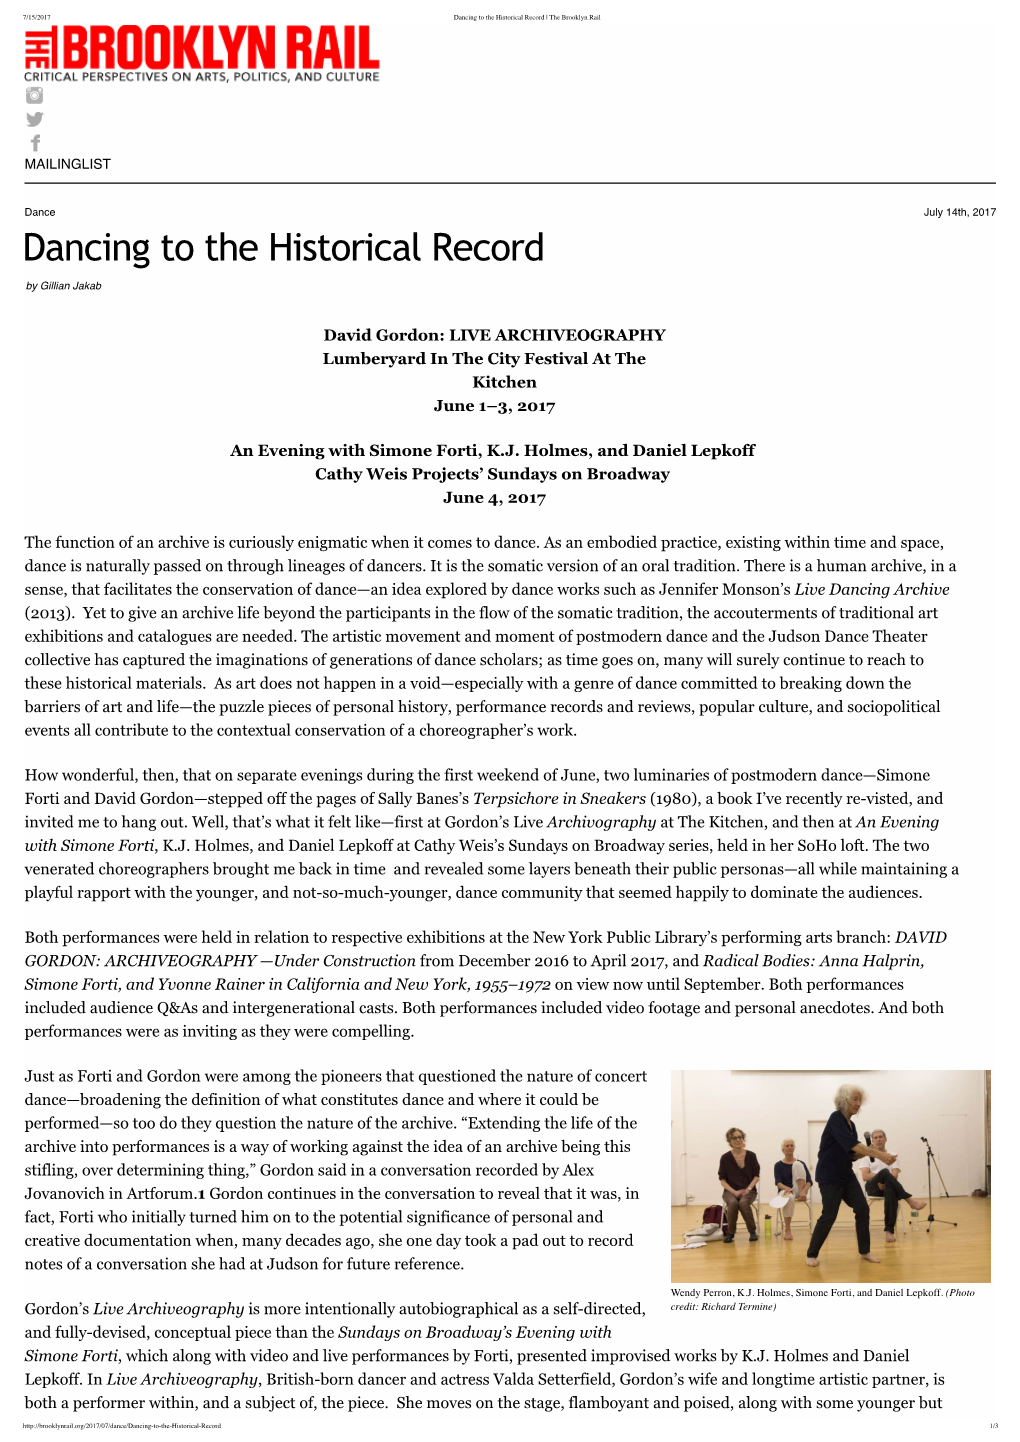 Dancing to the Historical Record | the Brooklyn Rail